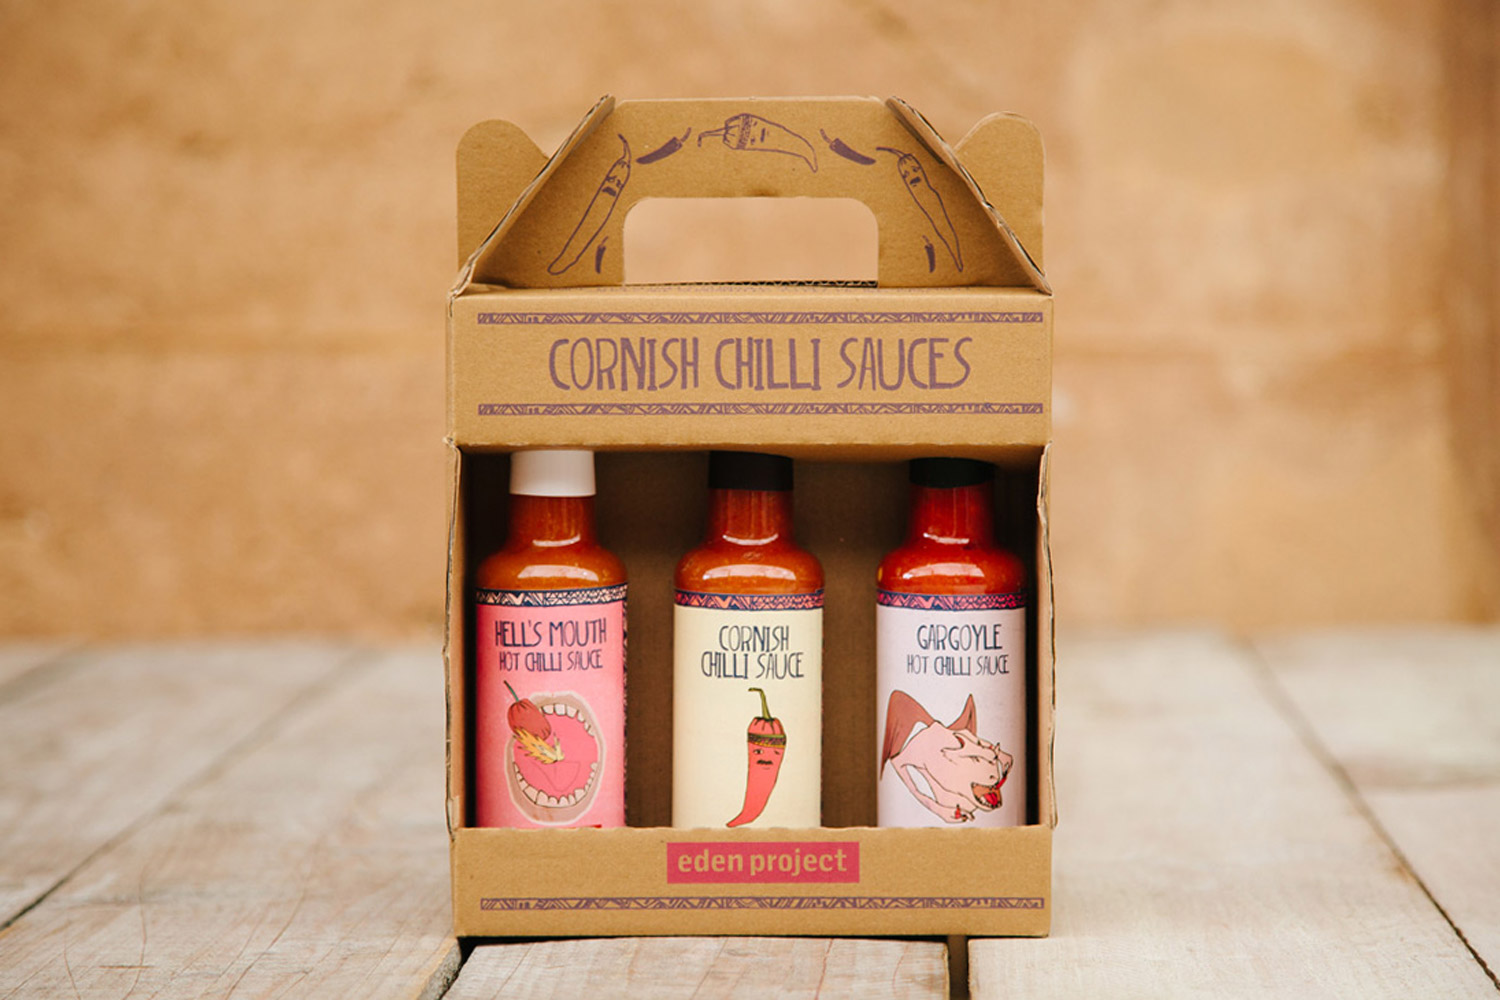 creative-packaging-eden-project-chilli-sauces-design-illustration-pic2